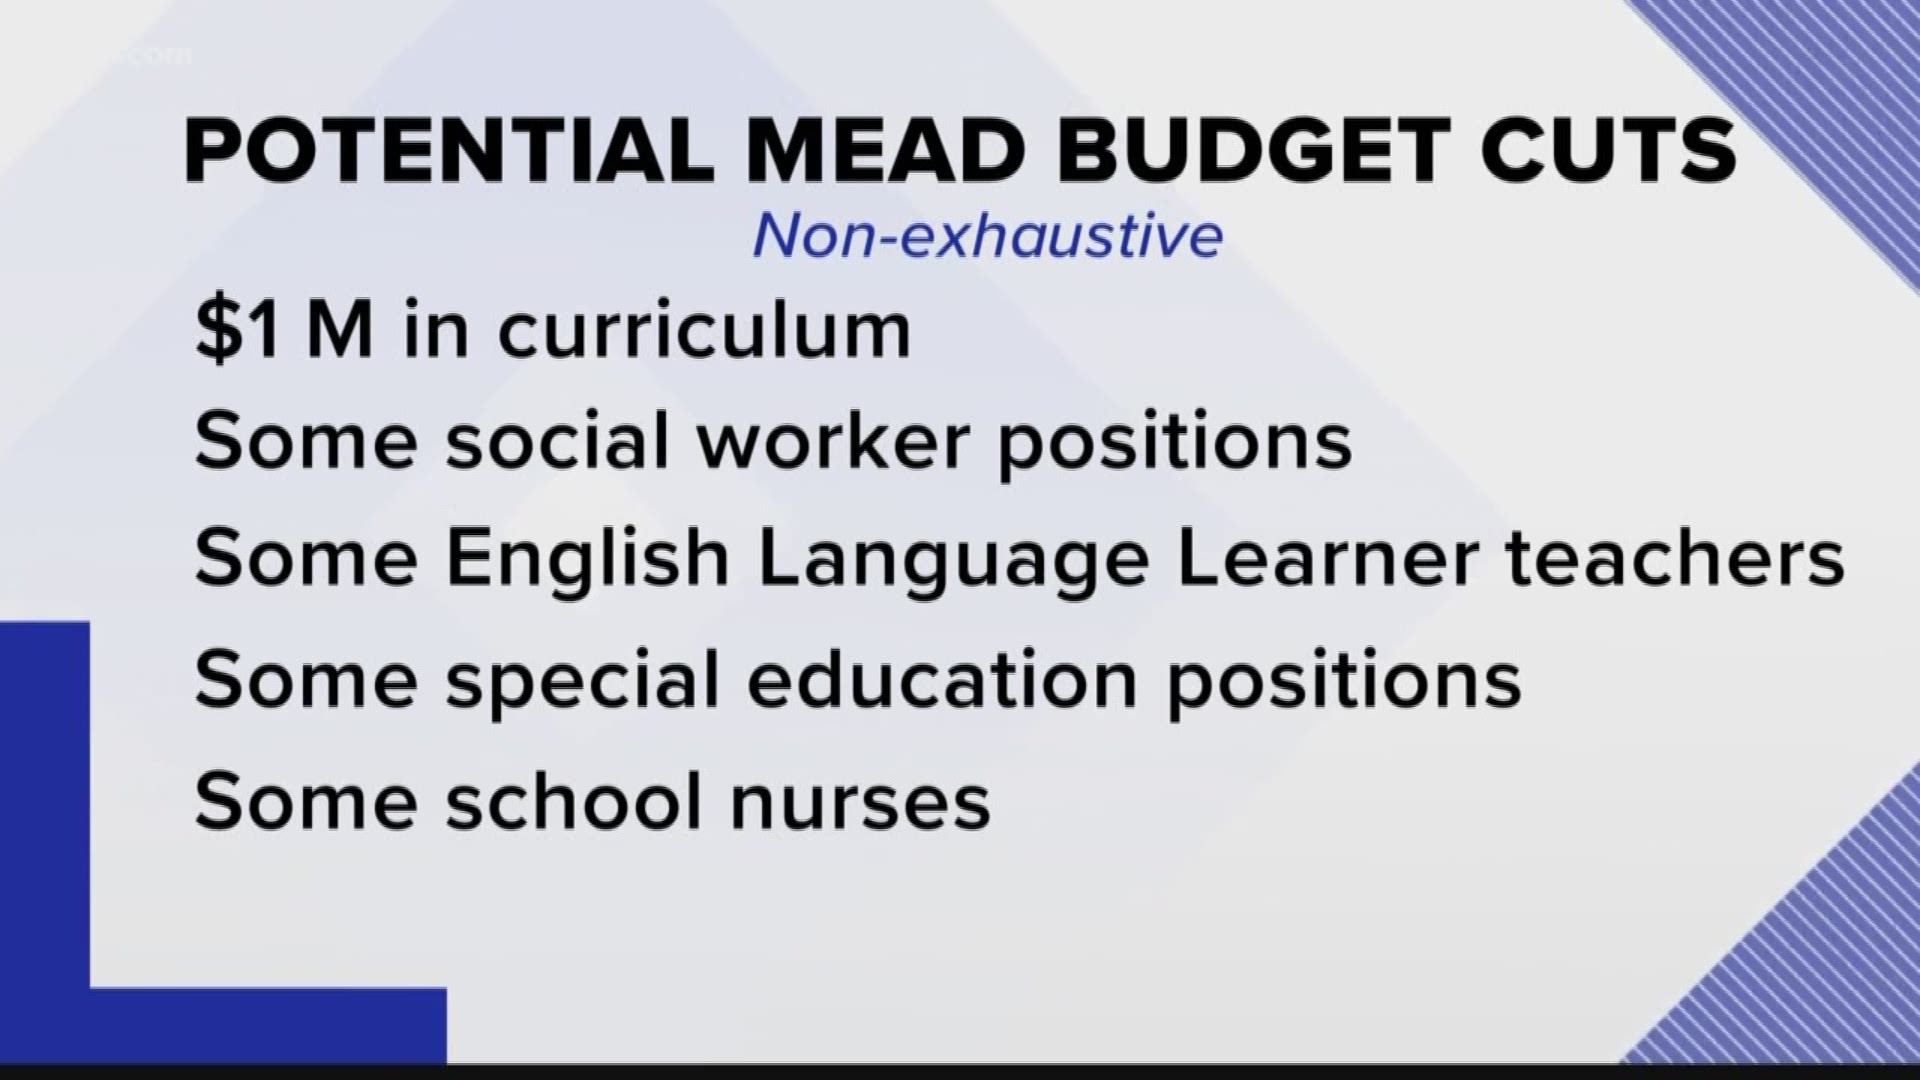 More than 70 Mead School District positions would be cut in the plan, including counselors, administrative assistants, custodians, nurses, coaches and some teaching positions for special education and Early Language Learner programs.